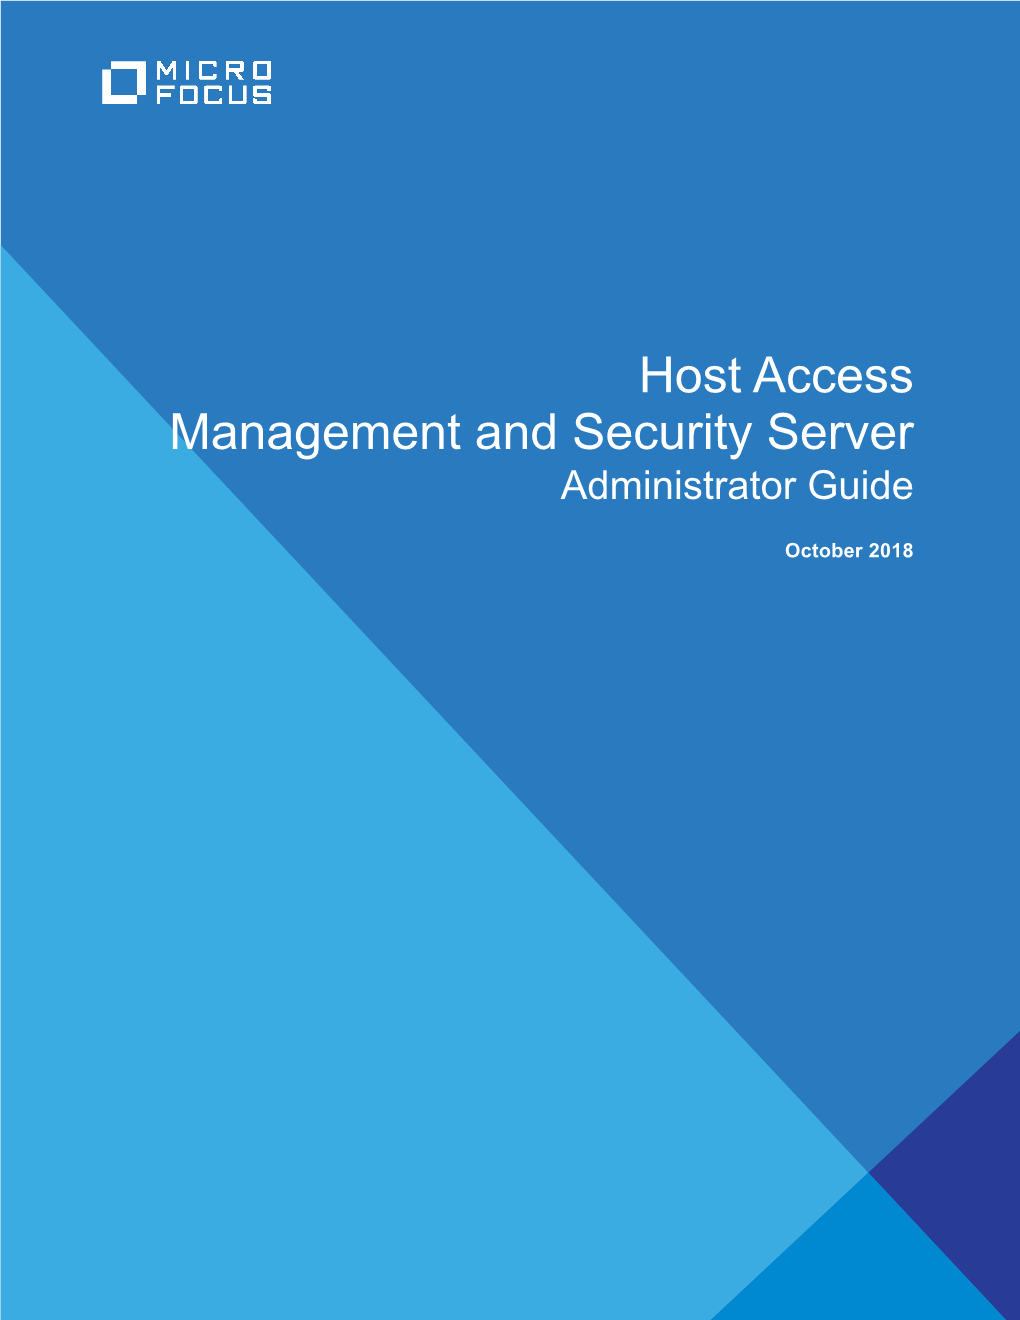 Host Access Management and Security Server Administrator Guide